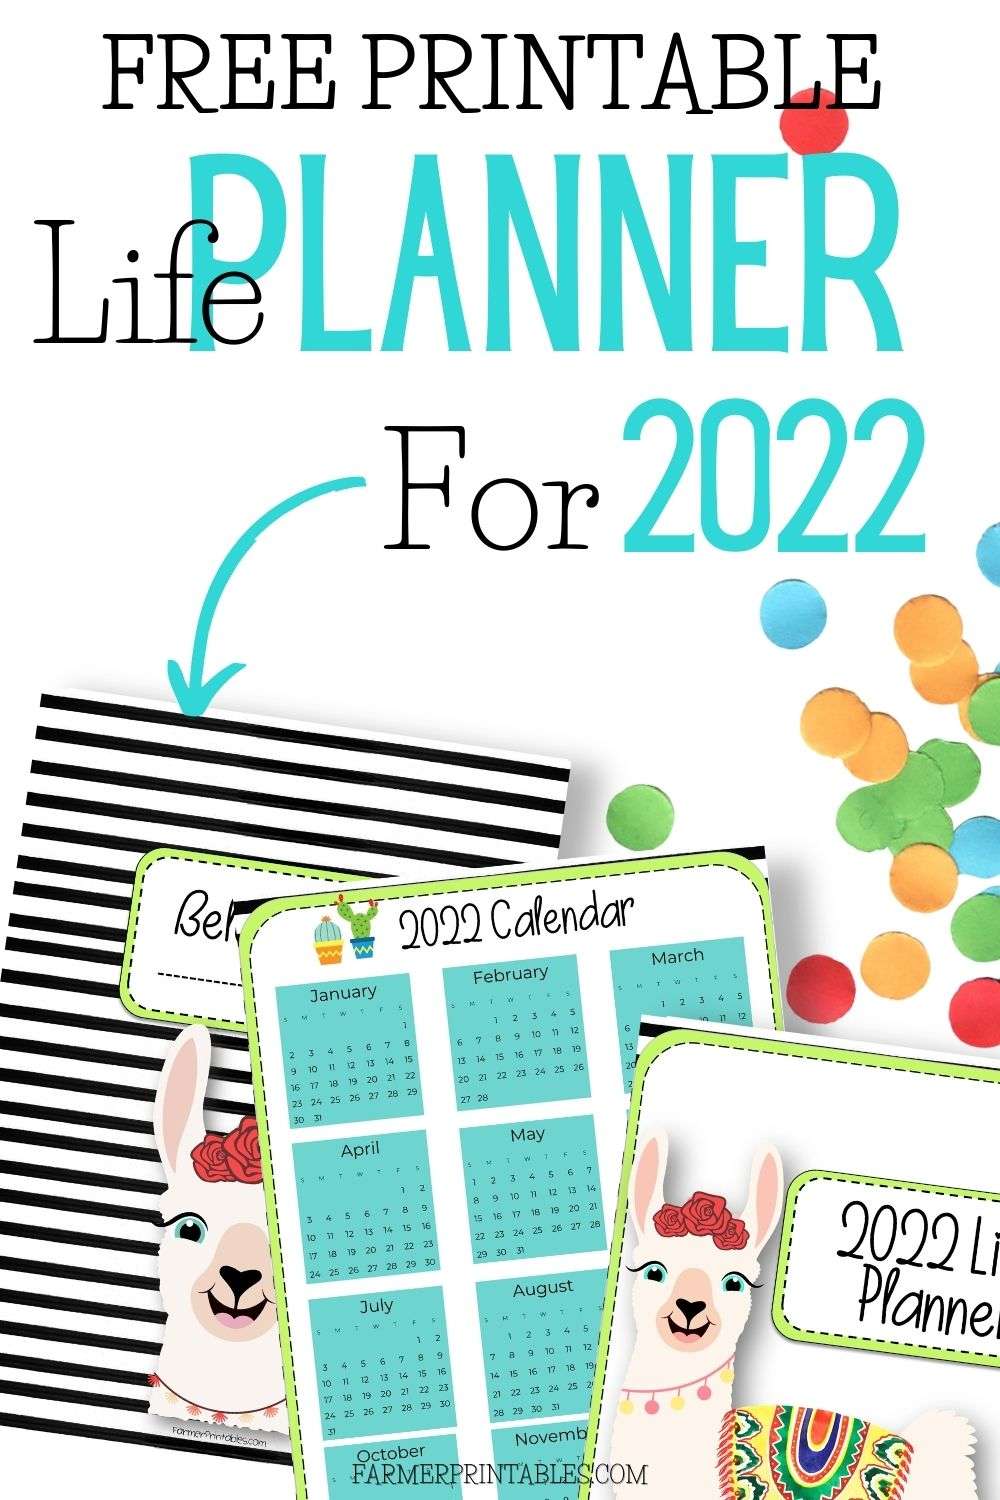 Free Printable Life Planner For 2022